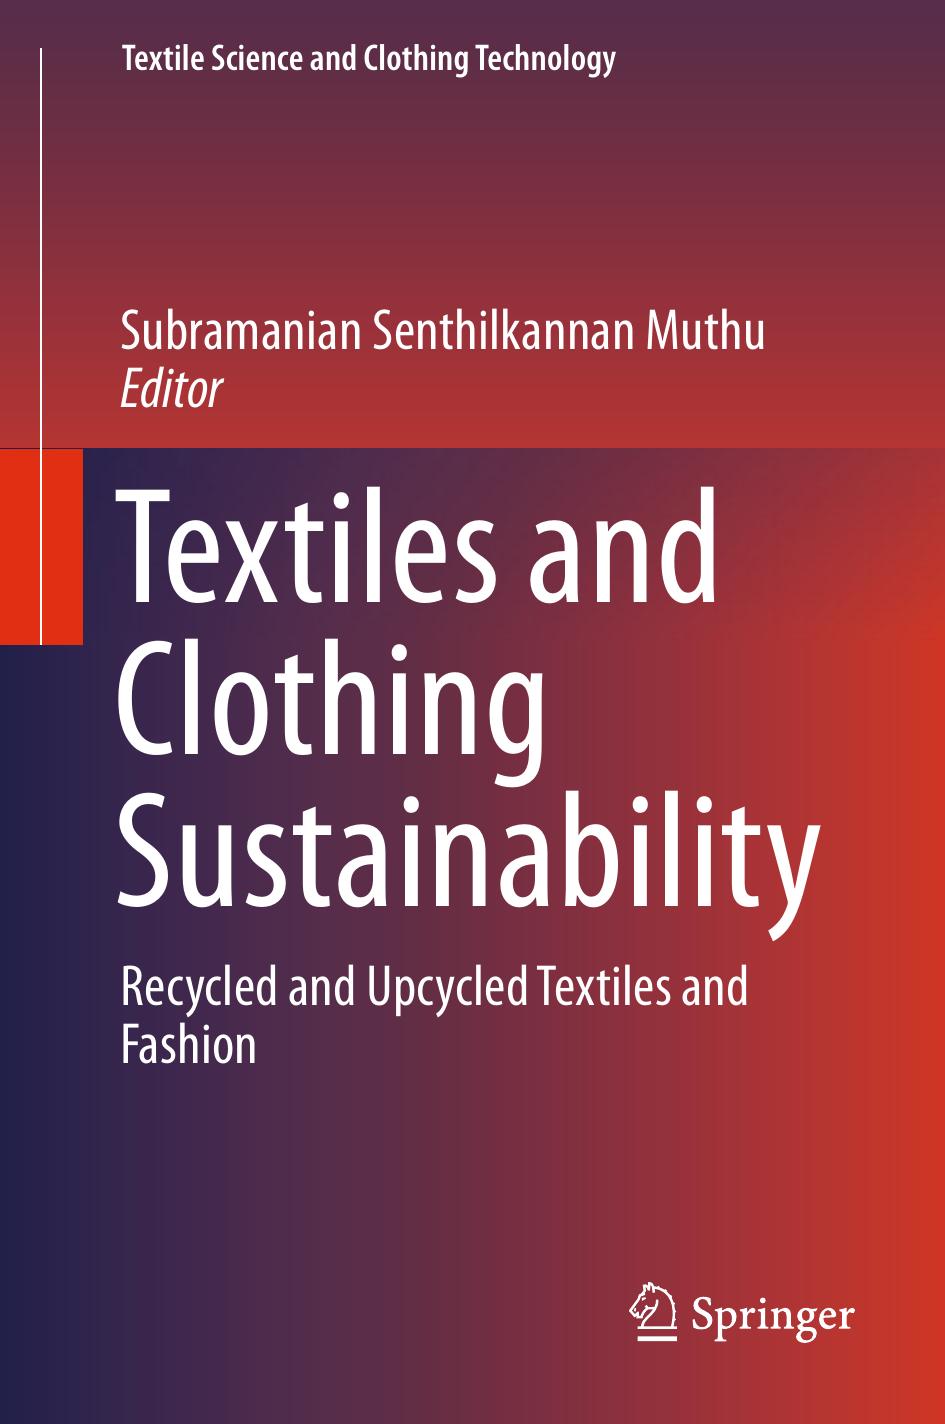 Textiles and Clothing Sustainability 2017